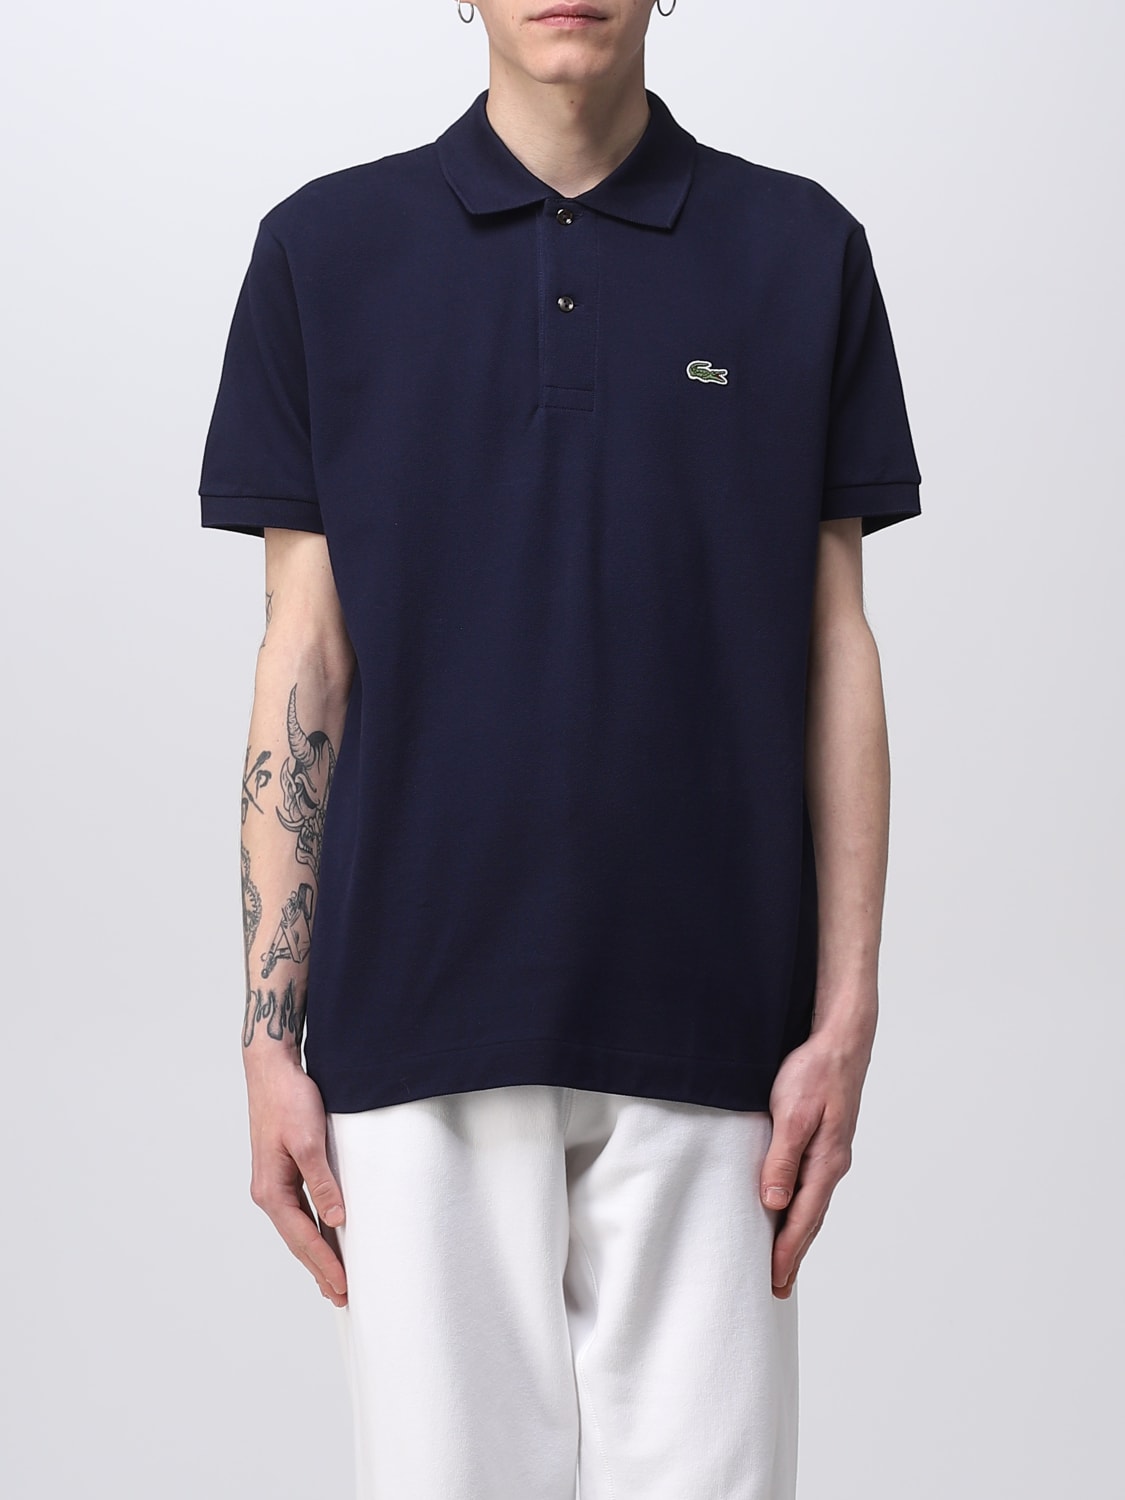 Lacoste Outlet: shirt man - Blue | Lacoste shirt AB1212 online GIGLIO.COM